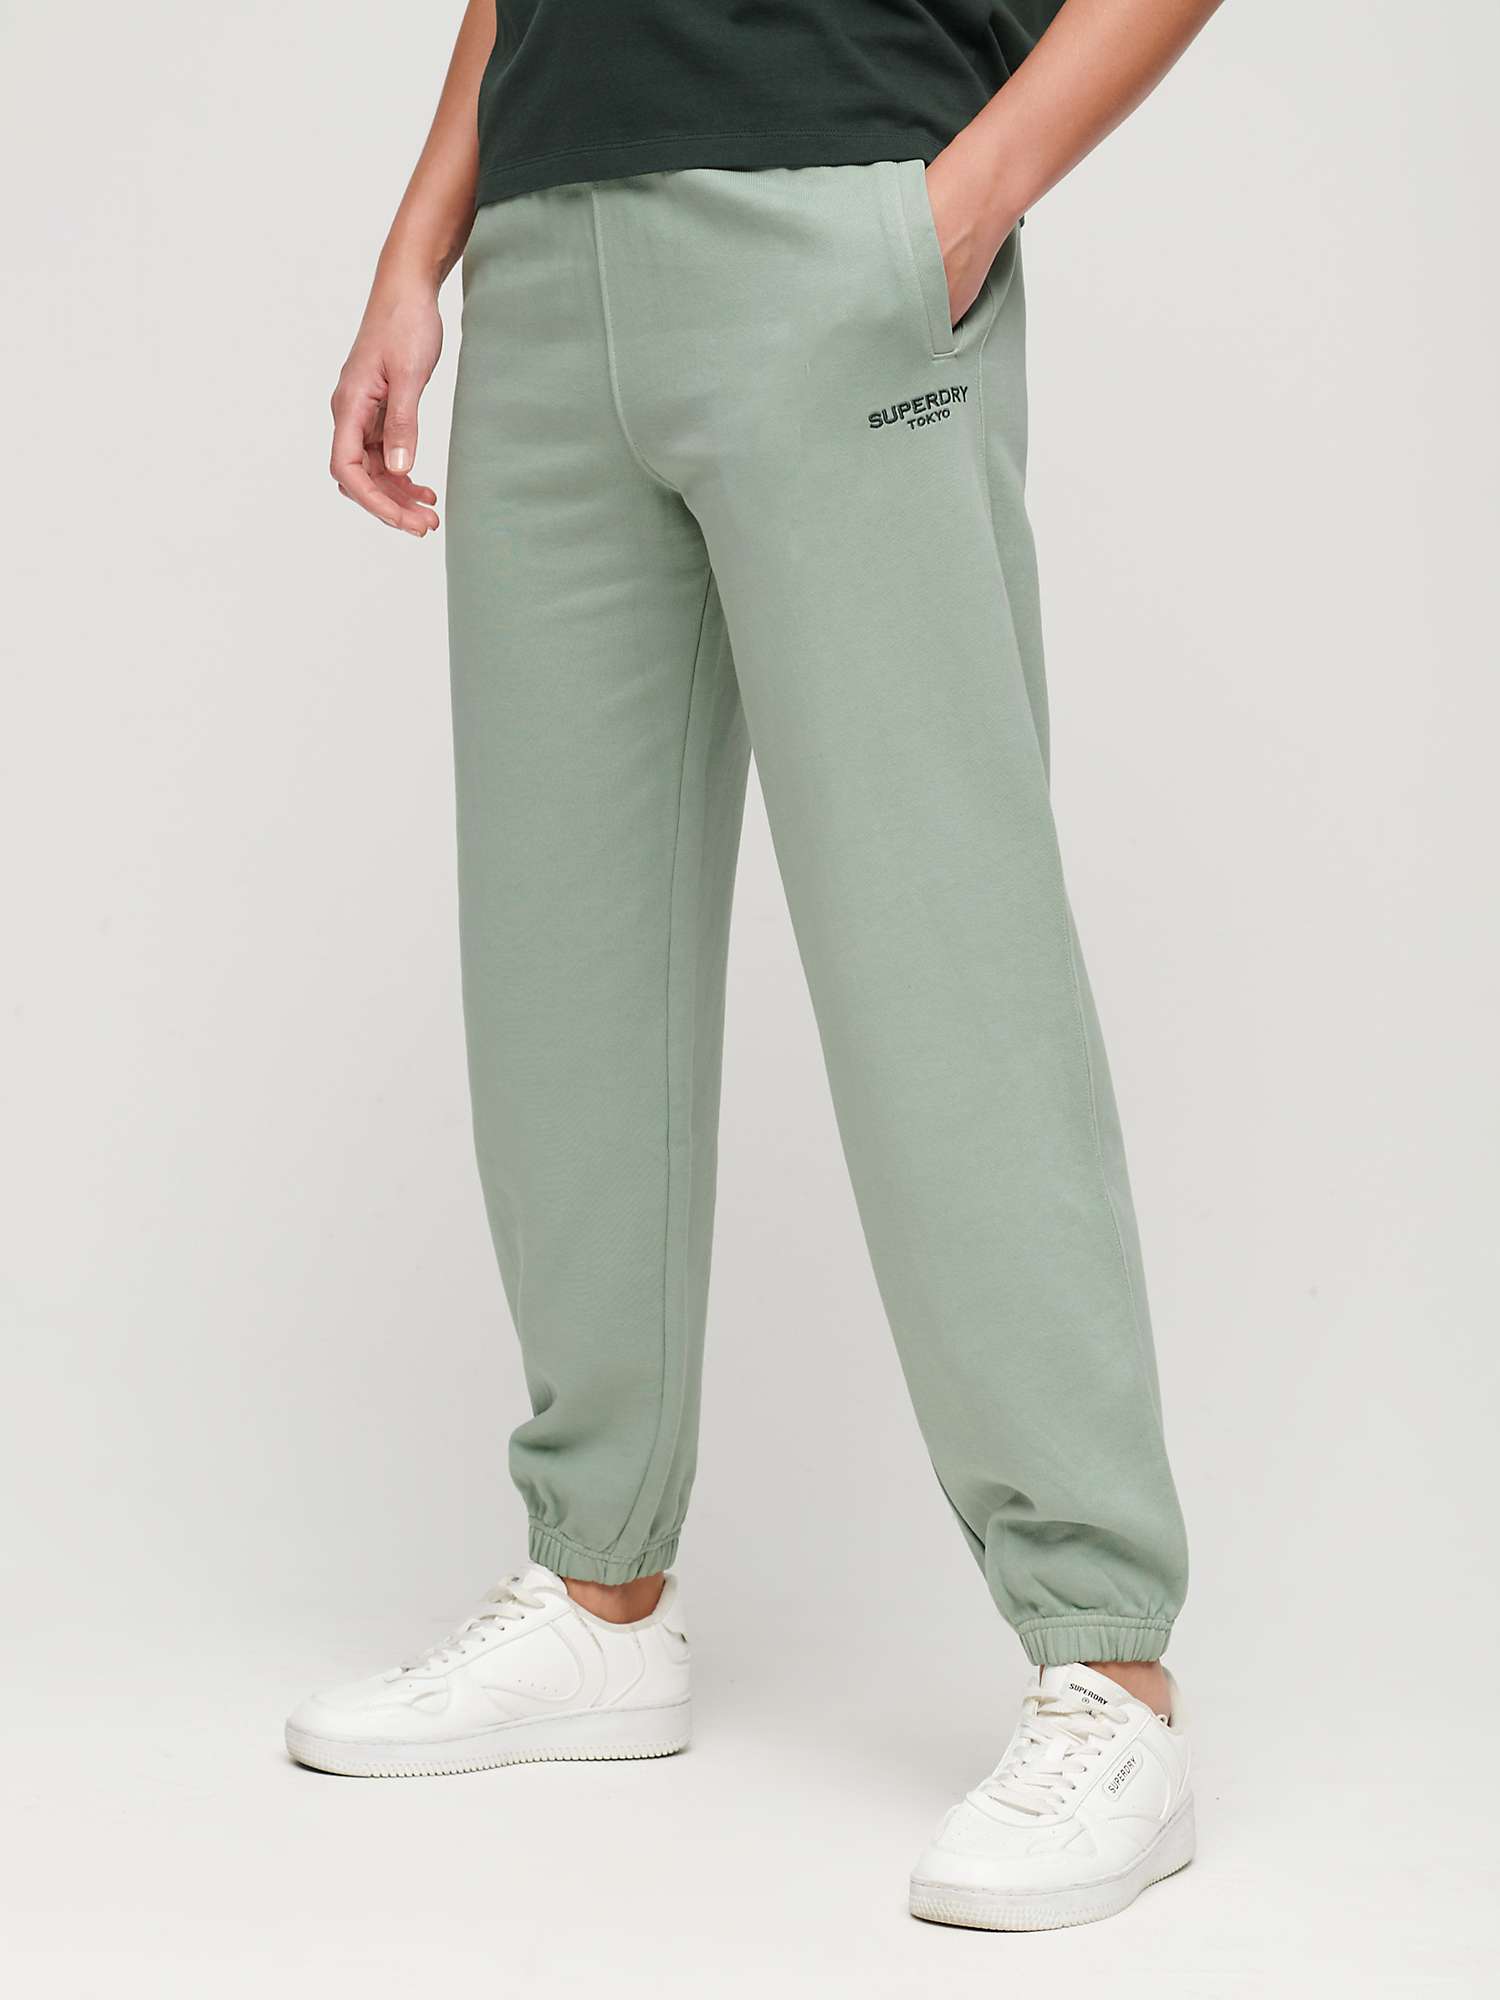 Superdry Embroidered Boyfriend Joggers, Light Jade Green at John Lewis ...